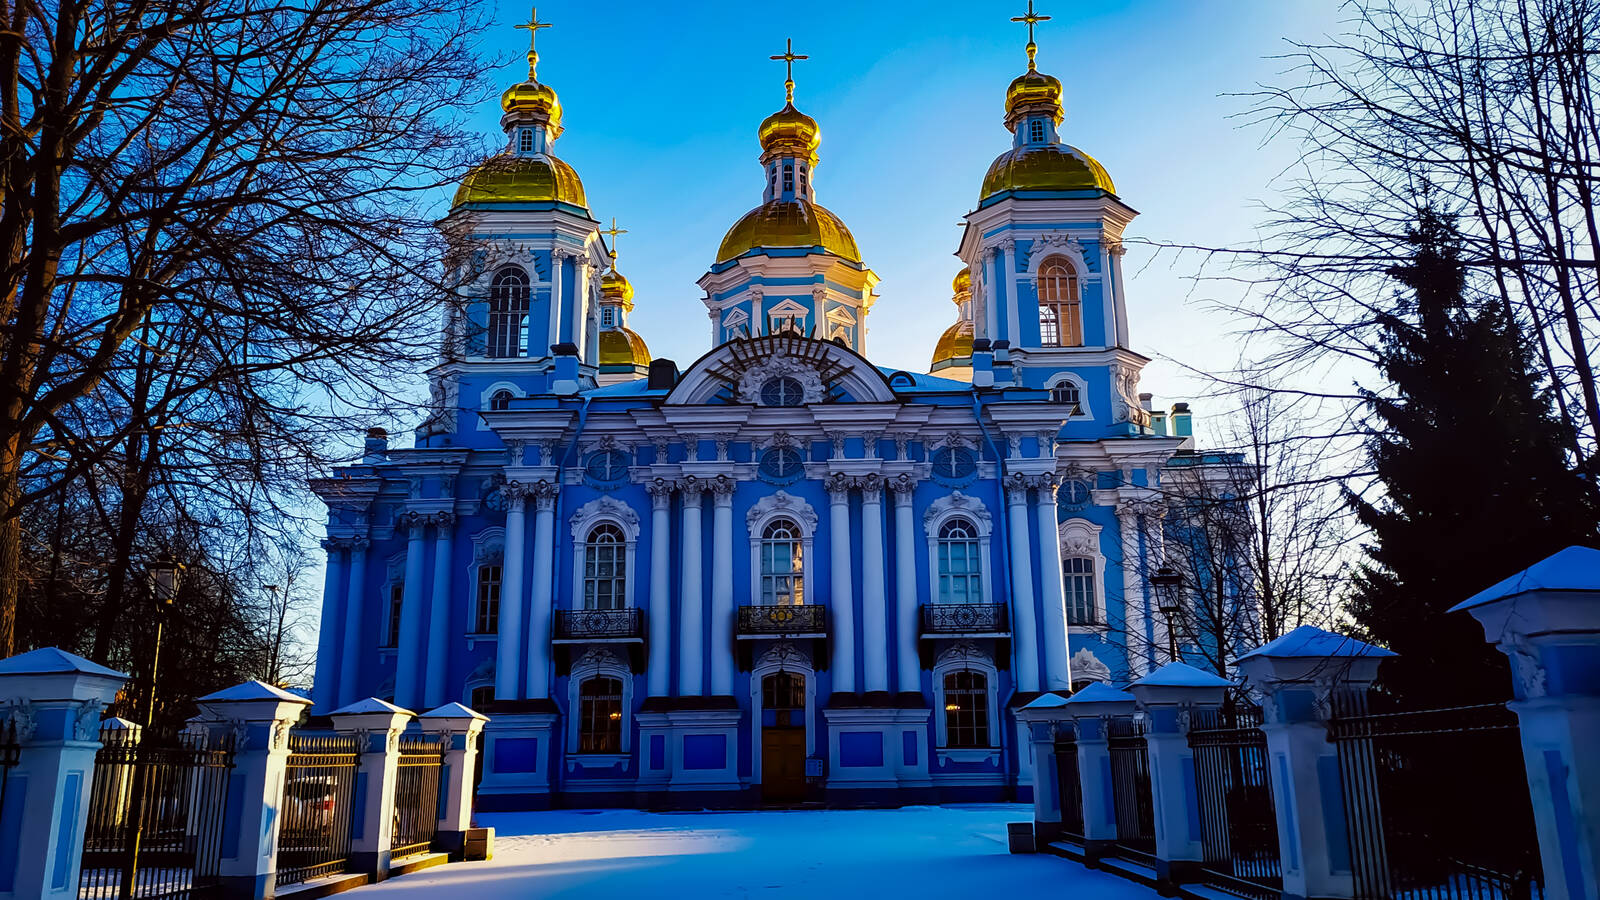 Image of Saint Nicholas Naval Cathedral by David Lally